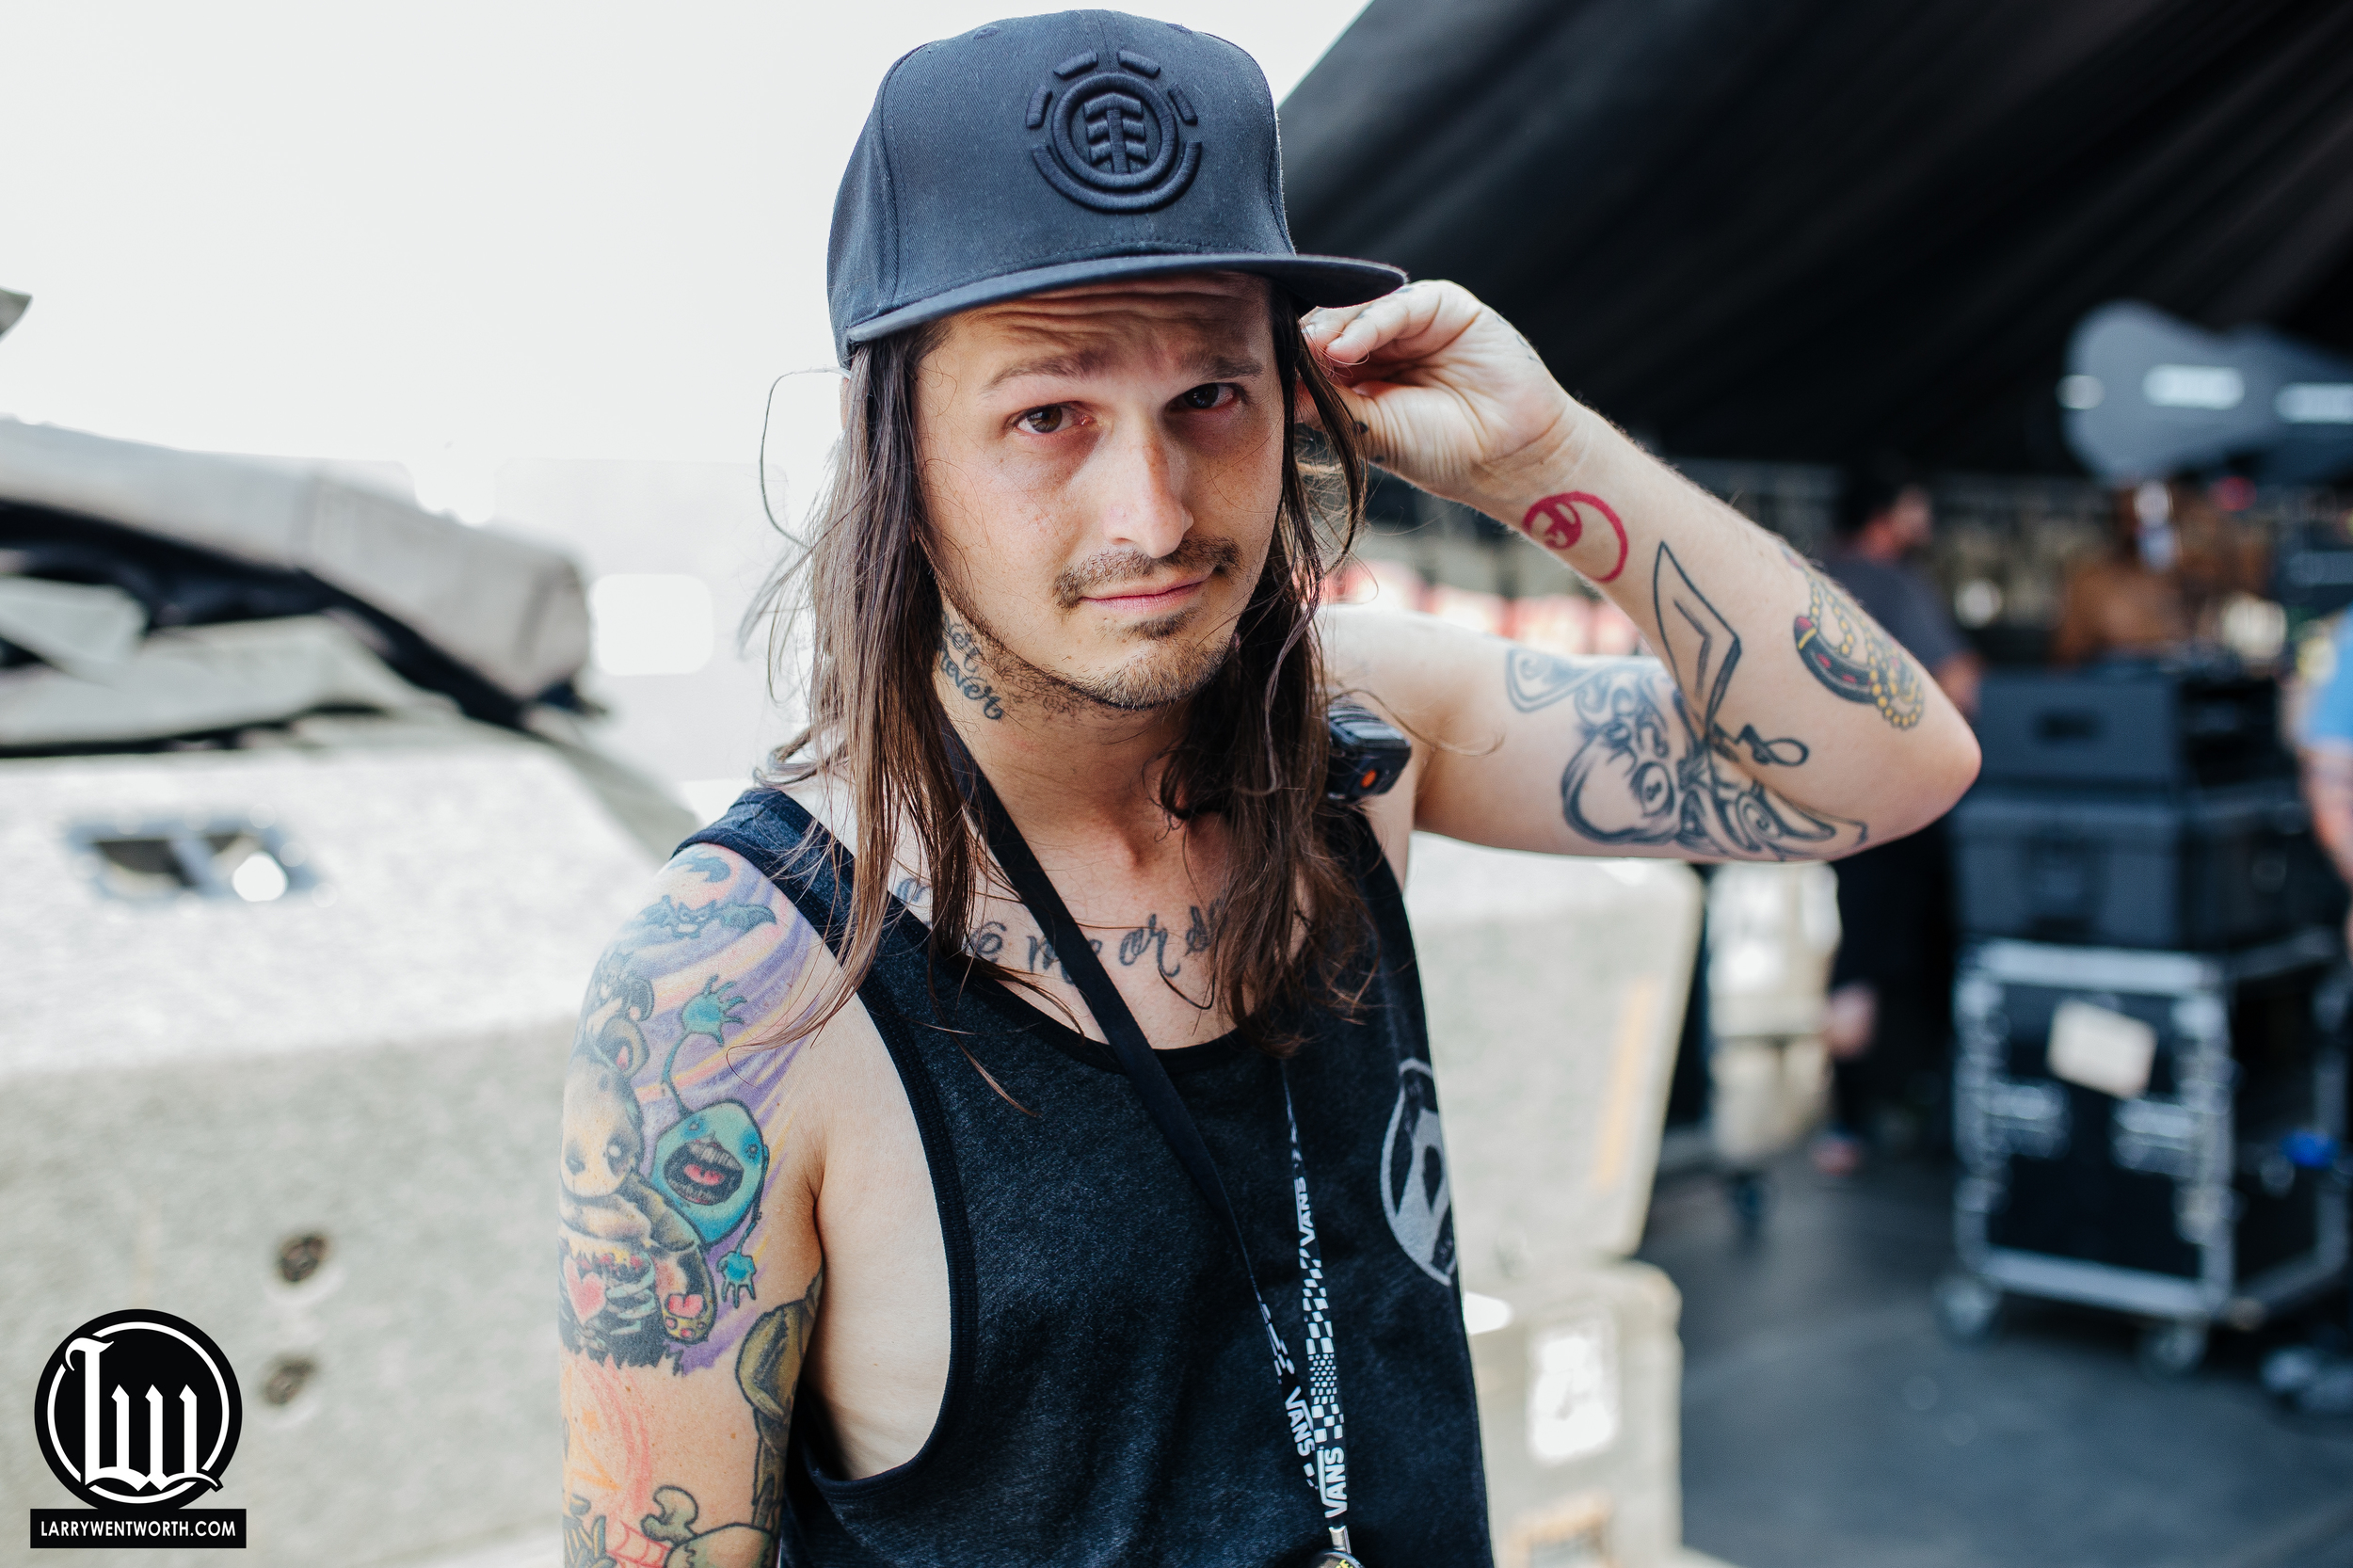 Memphis May Fire's Tour Manager, Dustin